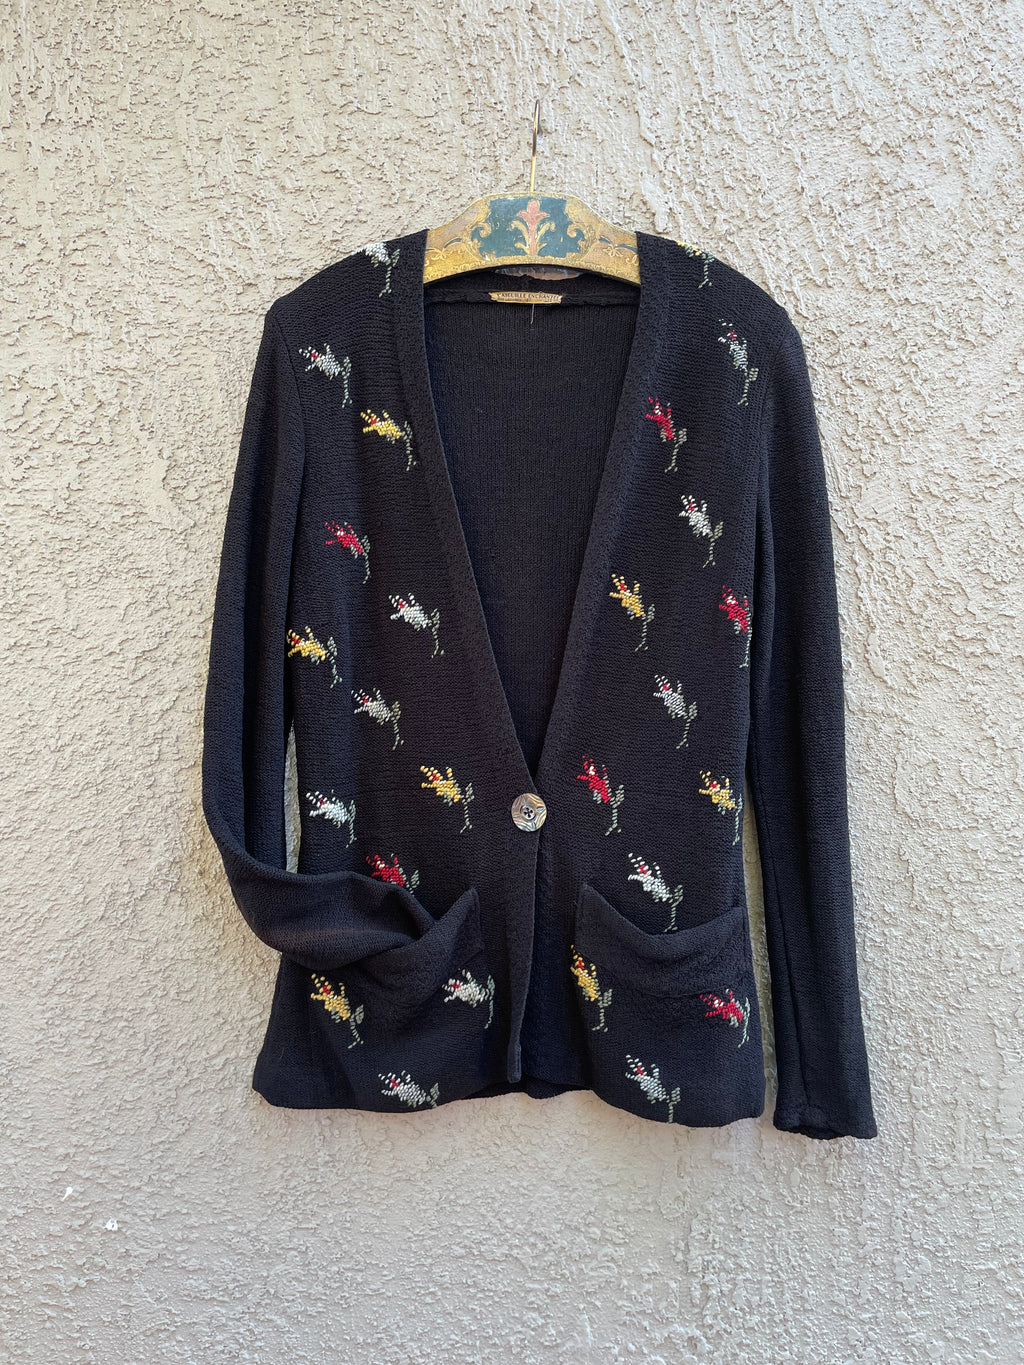 1920s Belgian Cotton Knit Hand Embroidered Floral Pocket Cardigan